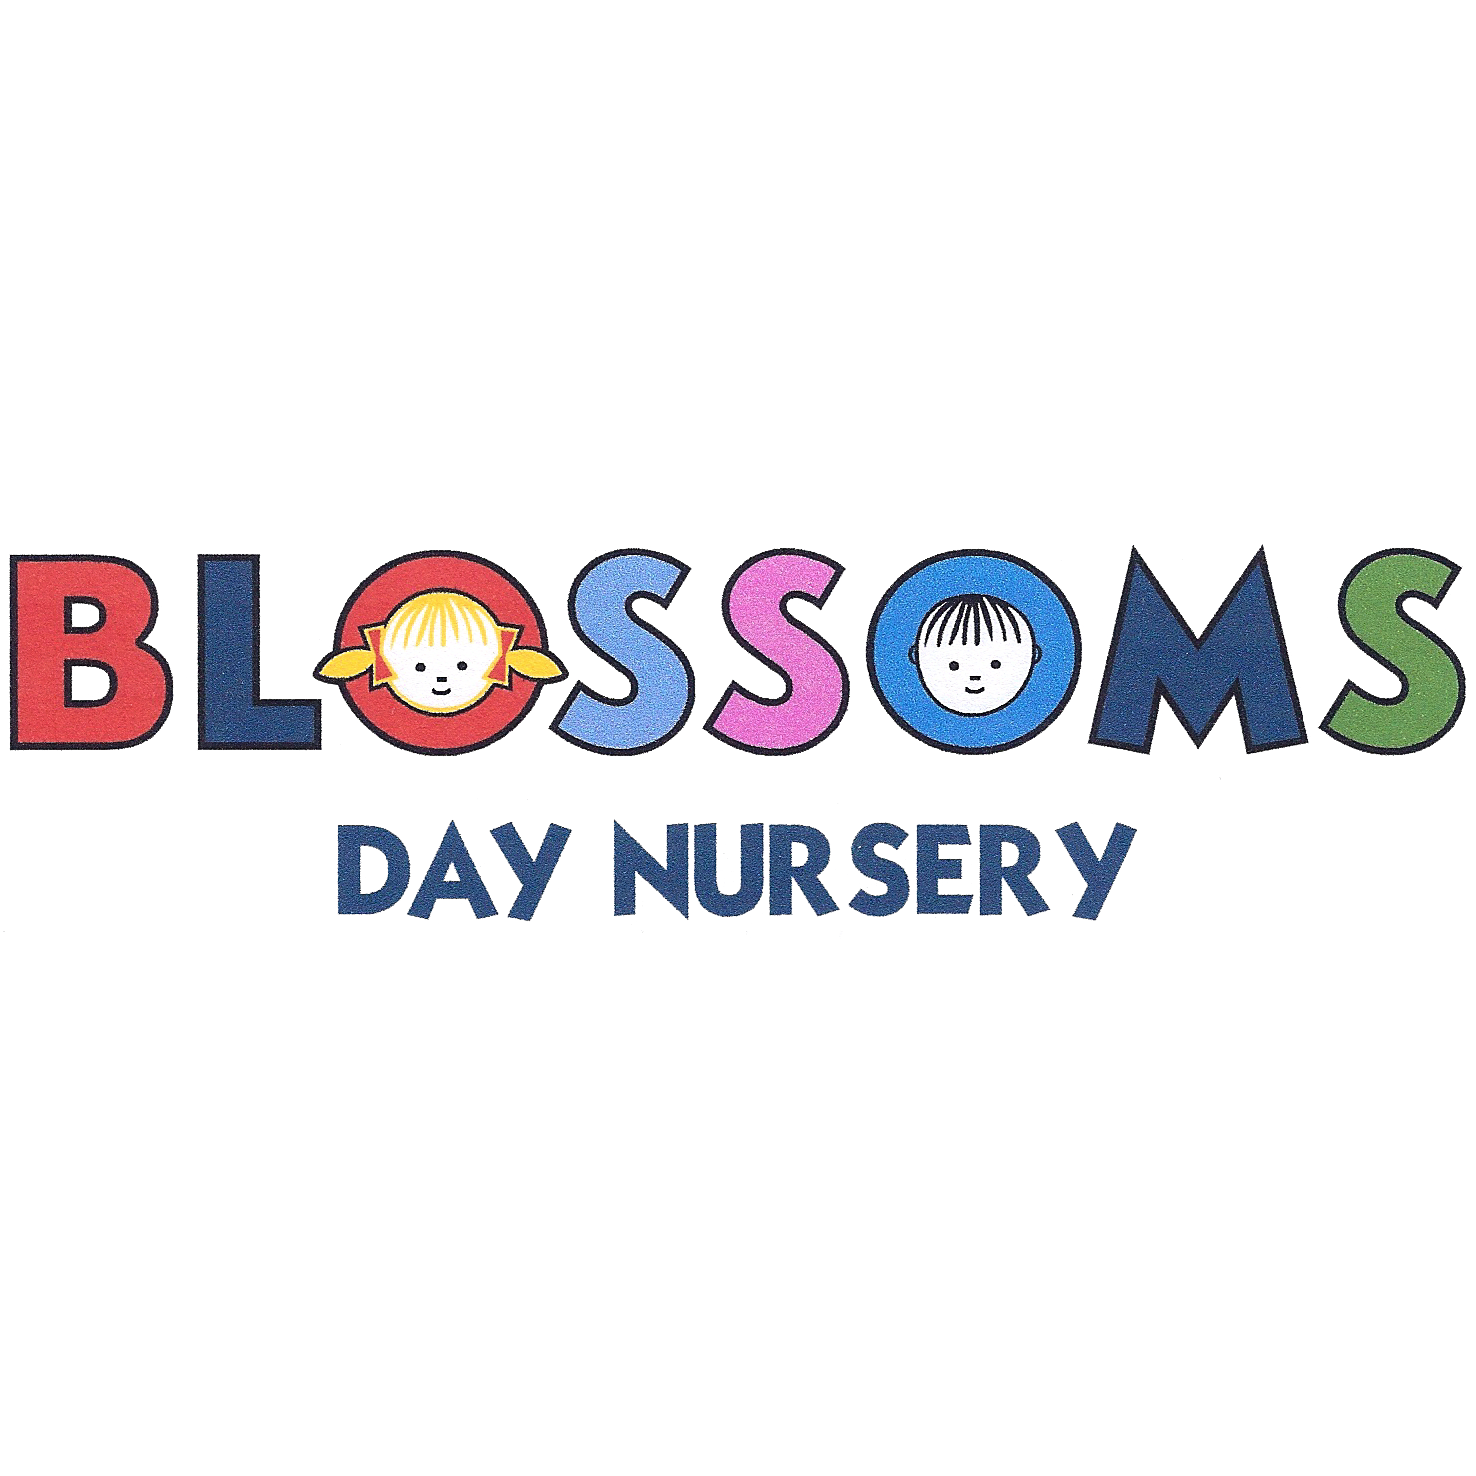 LOGO Blossoms Day Nursery Leicester 01162 448600